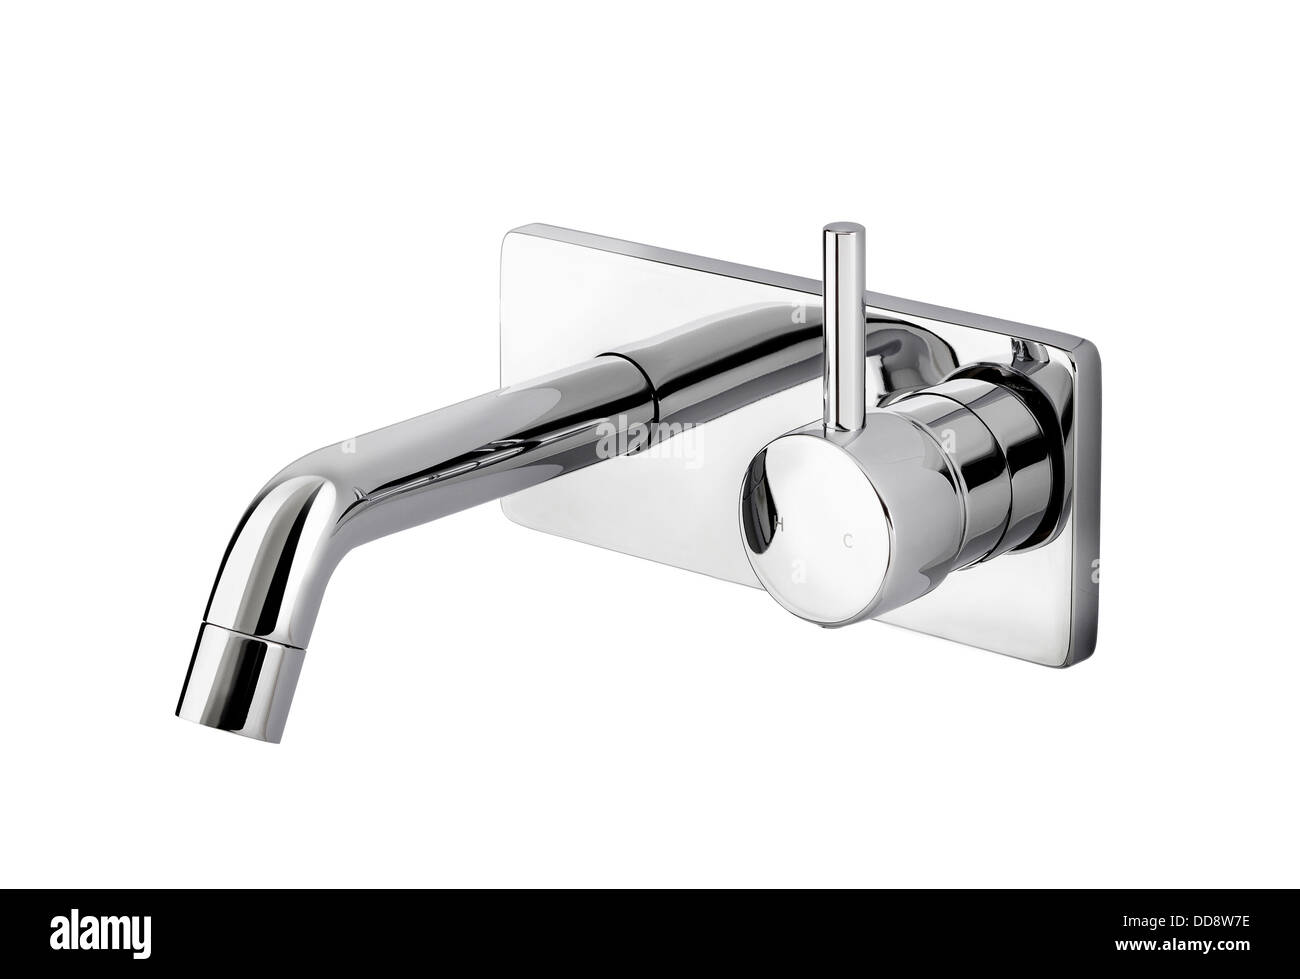 Beautiful modern designed of chrome faucet for hot and cold water Stock Photo